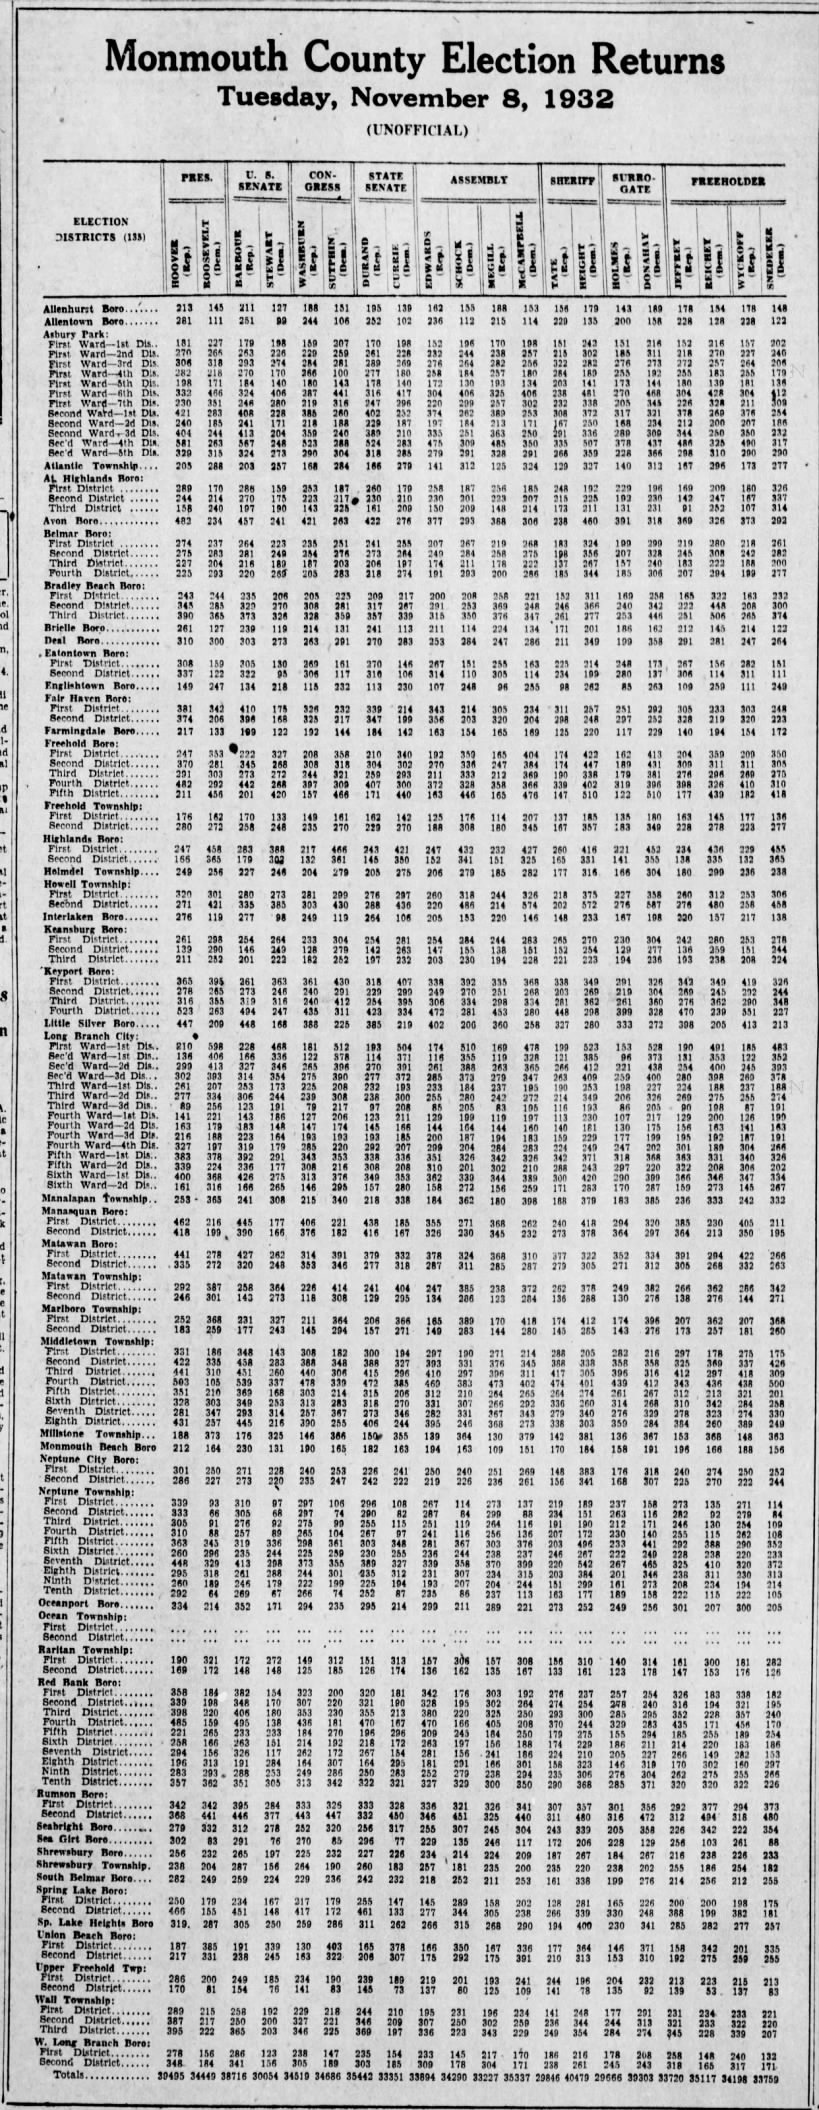 Monmouth County, NJ presidential election results, 1932